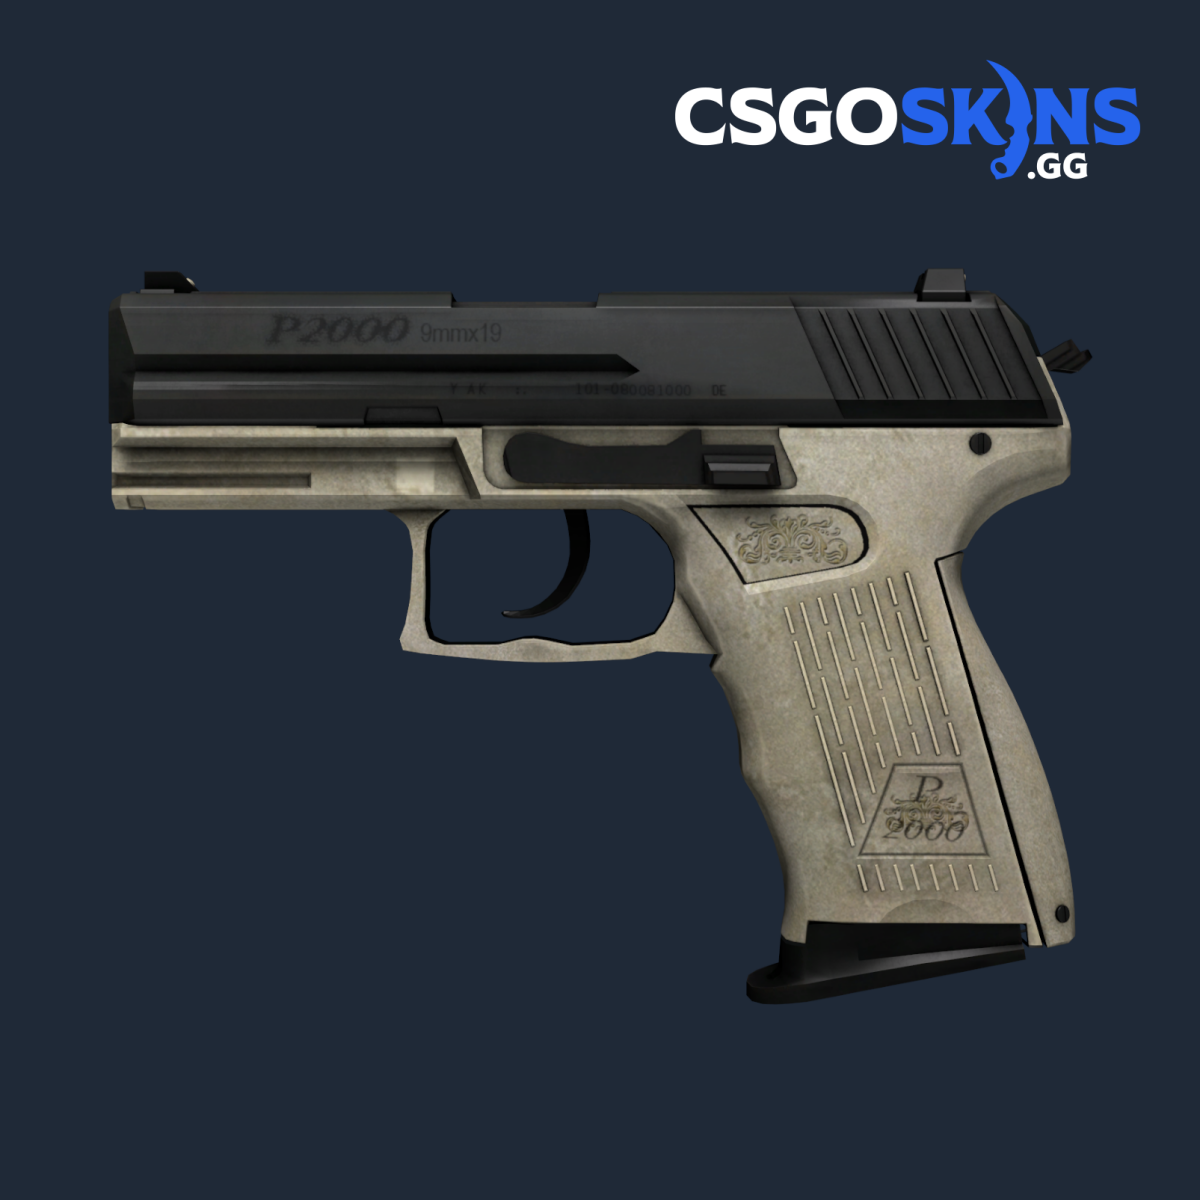 download the last version for android P2000 Ivory cs go skin